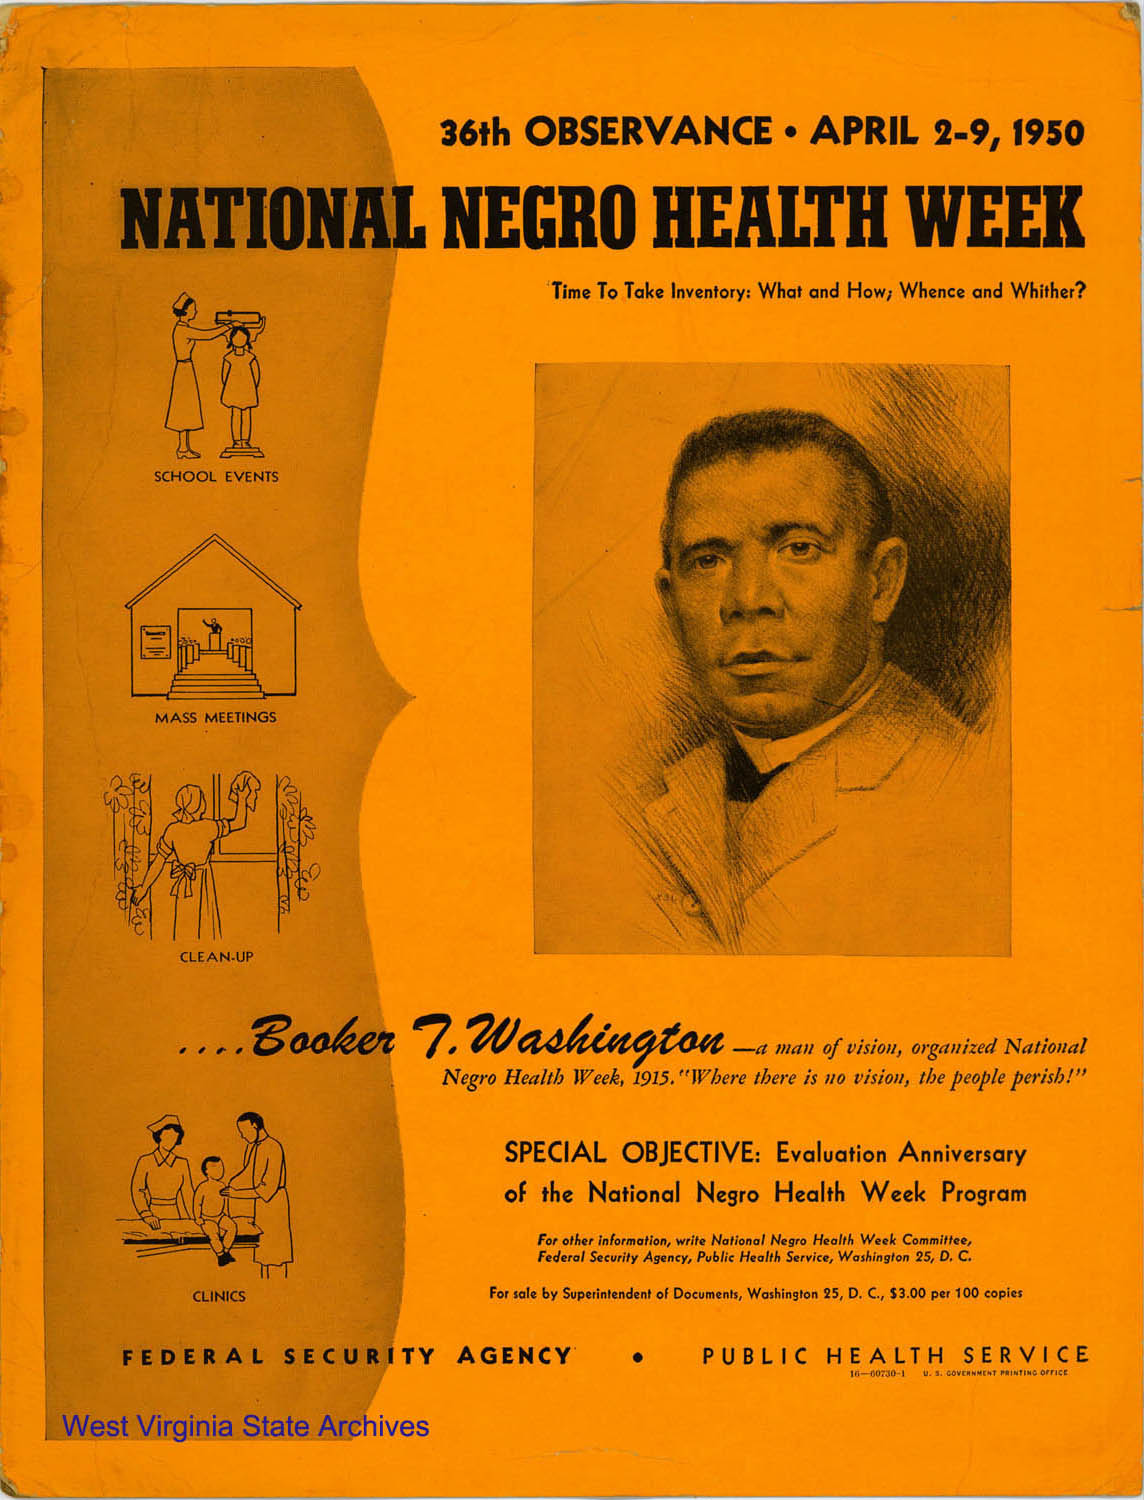 Poster for the 36th Observance of National Negro Health Week, 1950. (Ms2018-001)